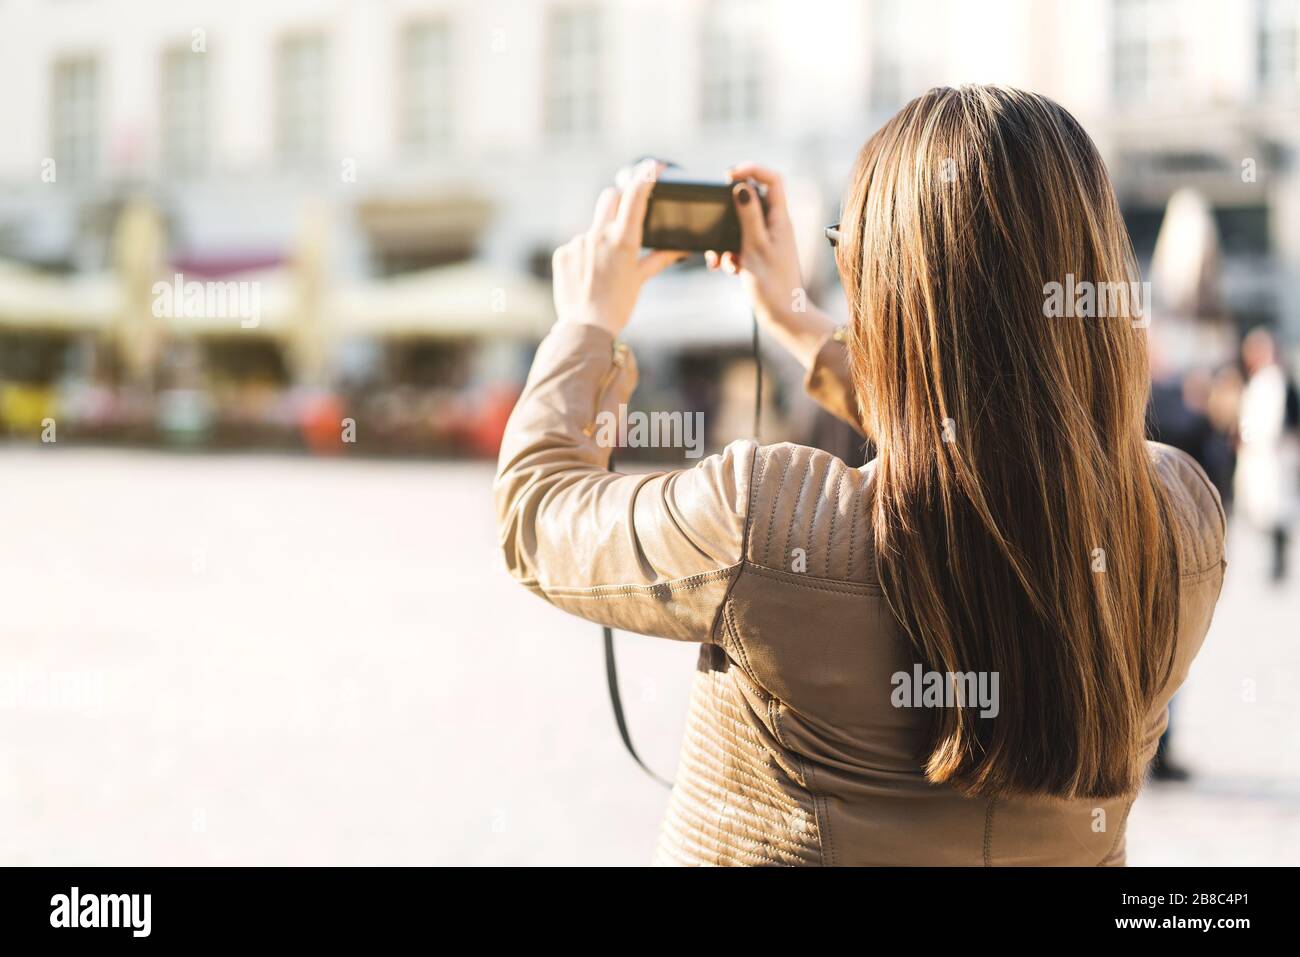 Tourist taking photo of town square during vacation with camera. Woman taking holiday picture in city. Tourism concept. Back view of female person. Stock Photo